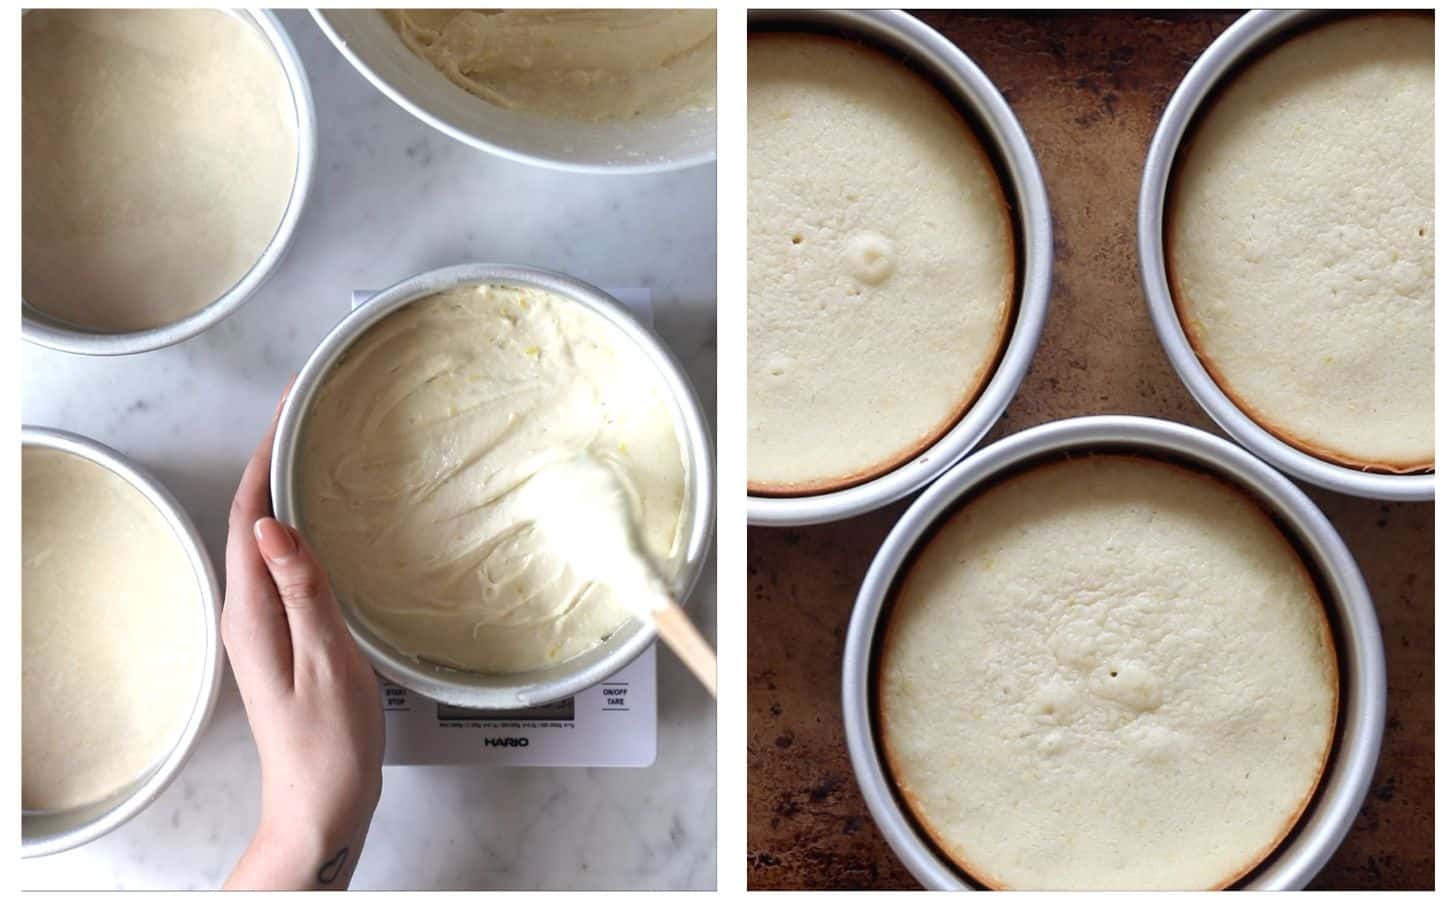 Two images making strawberry lemon layer cake; in photo 1, a hand uses a white rubber spatula to spread batter in a round cake pan on a white counter next to two more cake pans. In photo 2, three cake pans with baked cakes on a gold sheet pan.